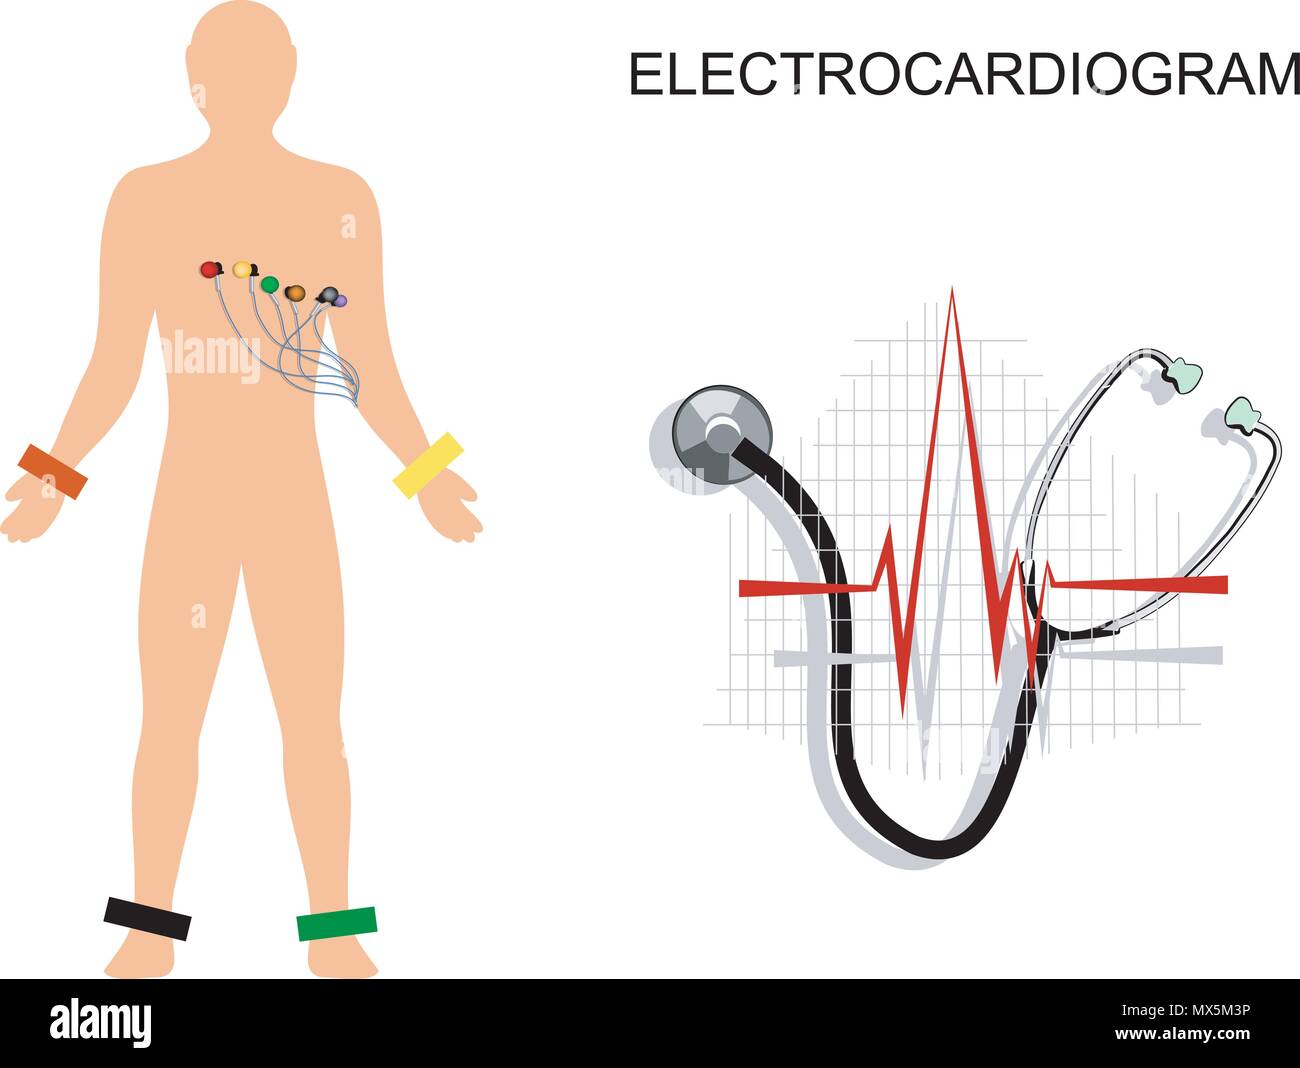 illustration of the electrocardiogram. the patient with electrodes on the chest. Stock Vector